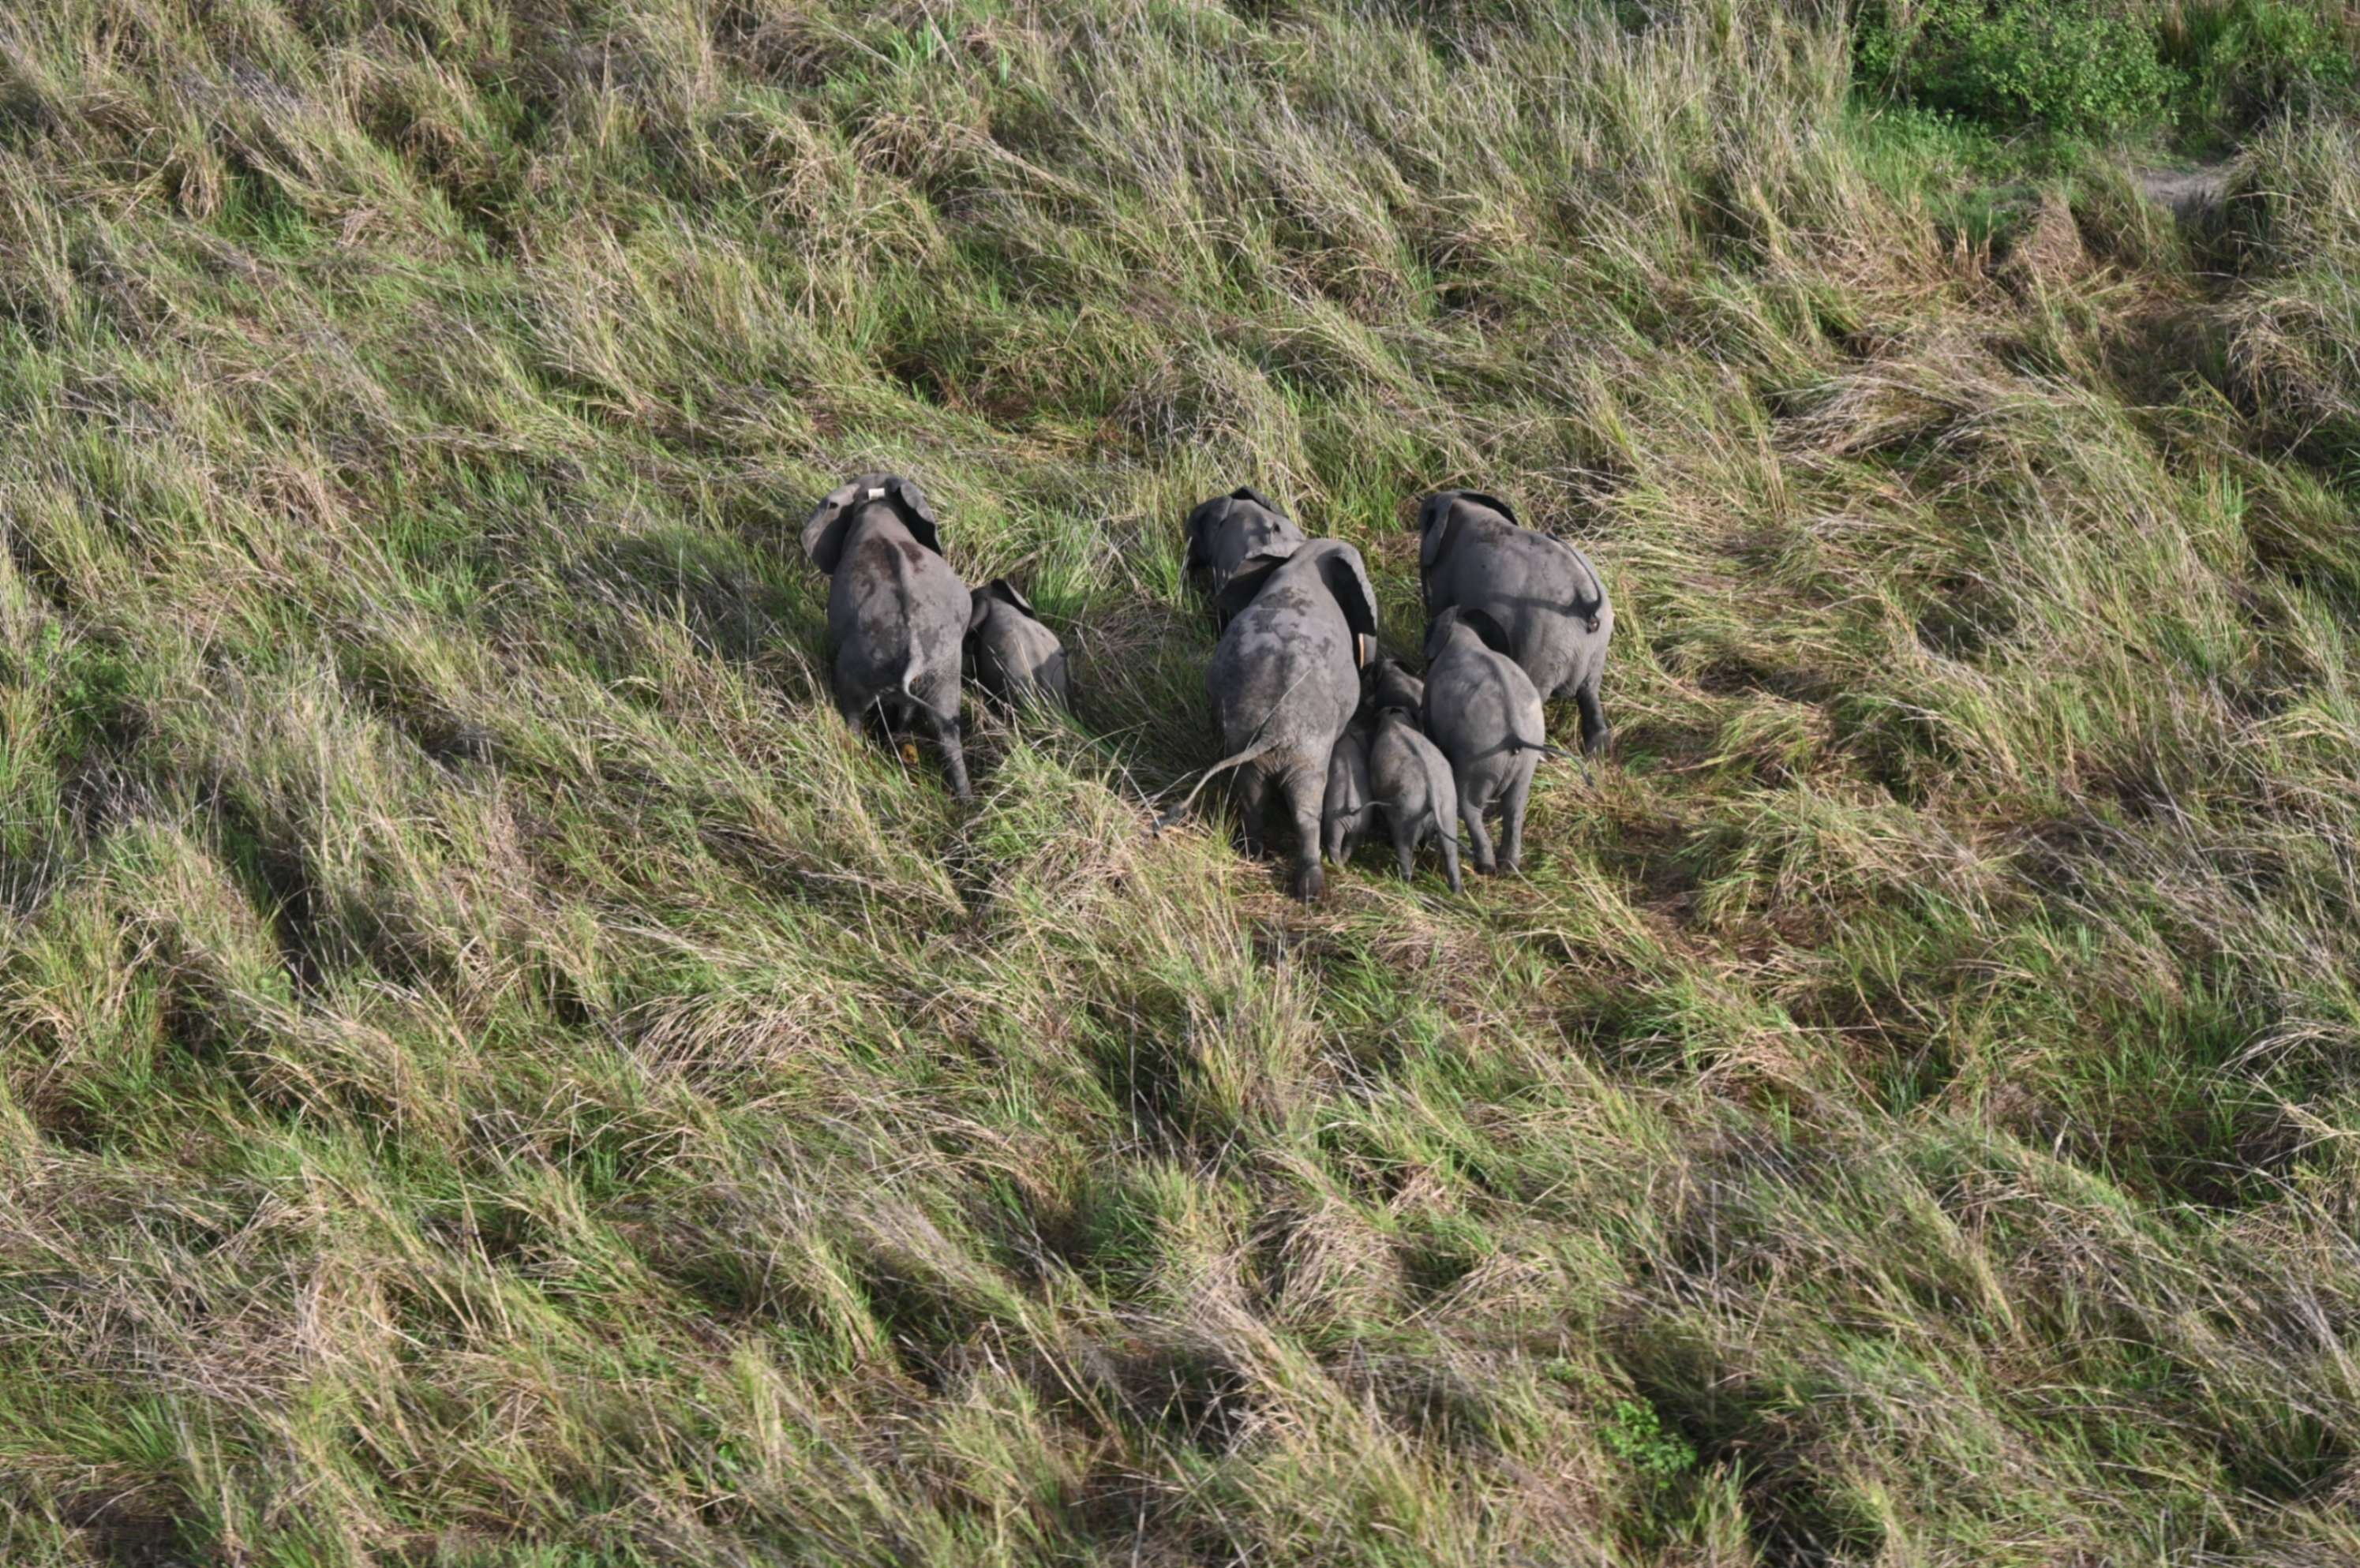 A small herd of elephants on grassland, seen from above.